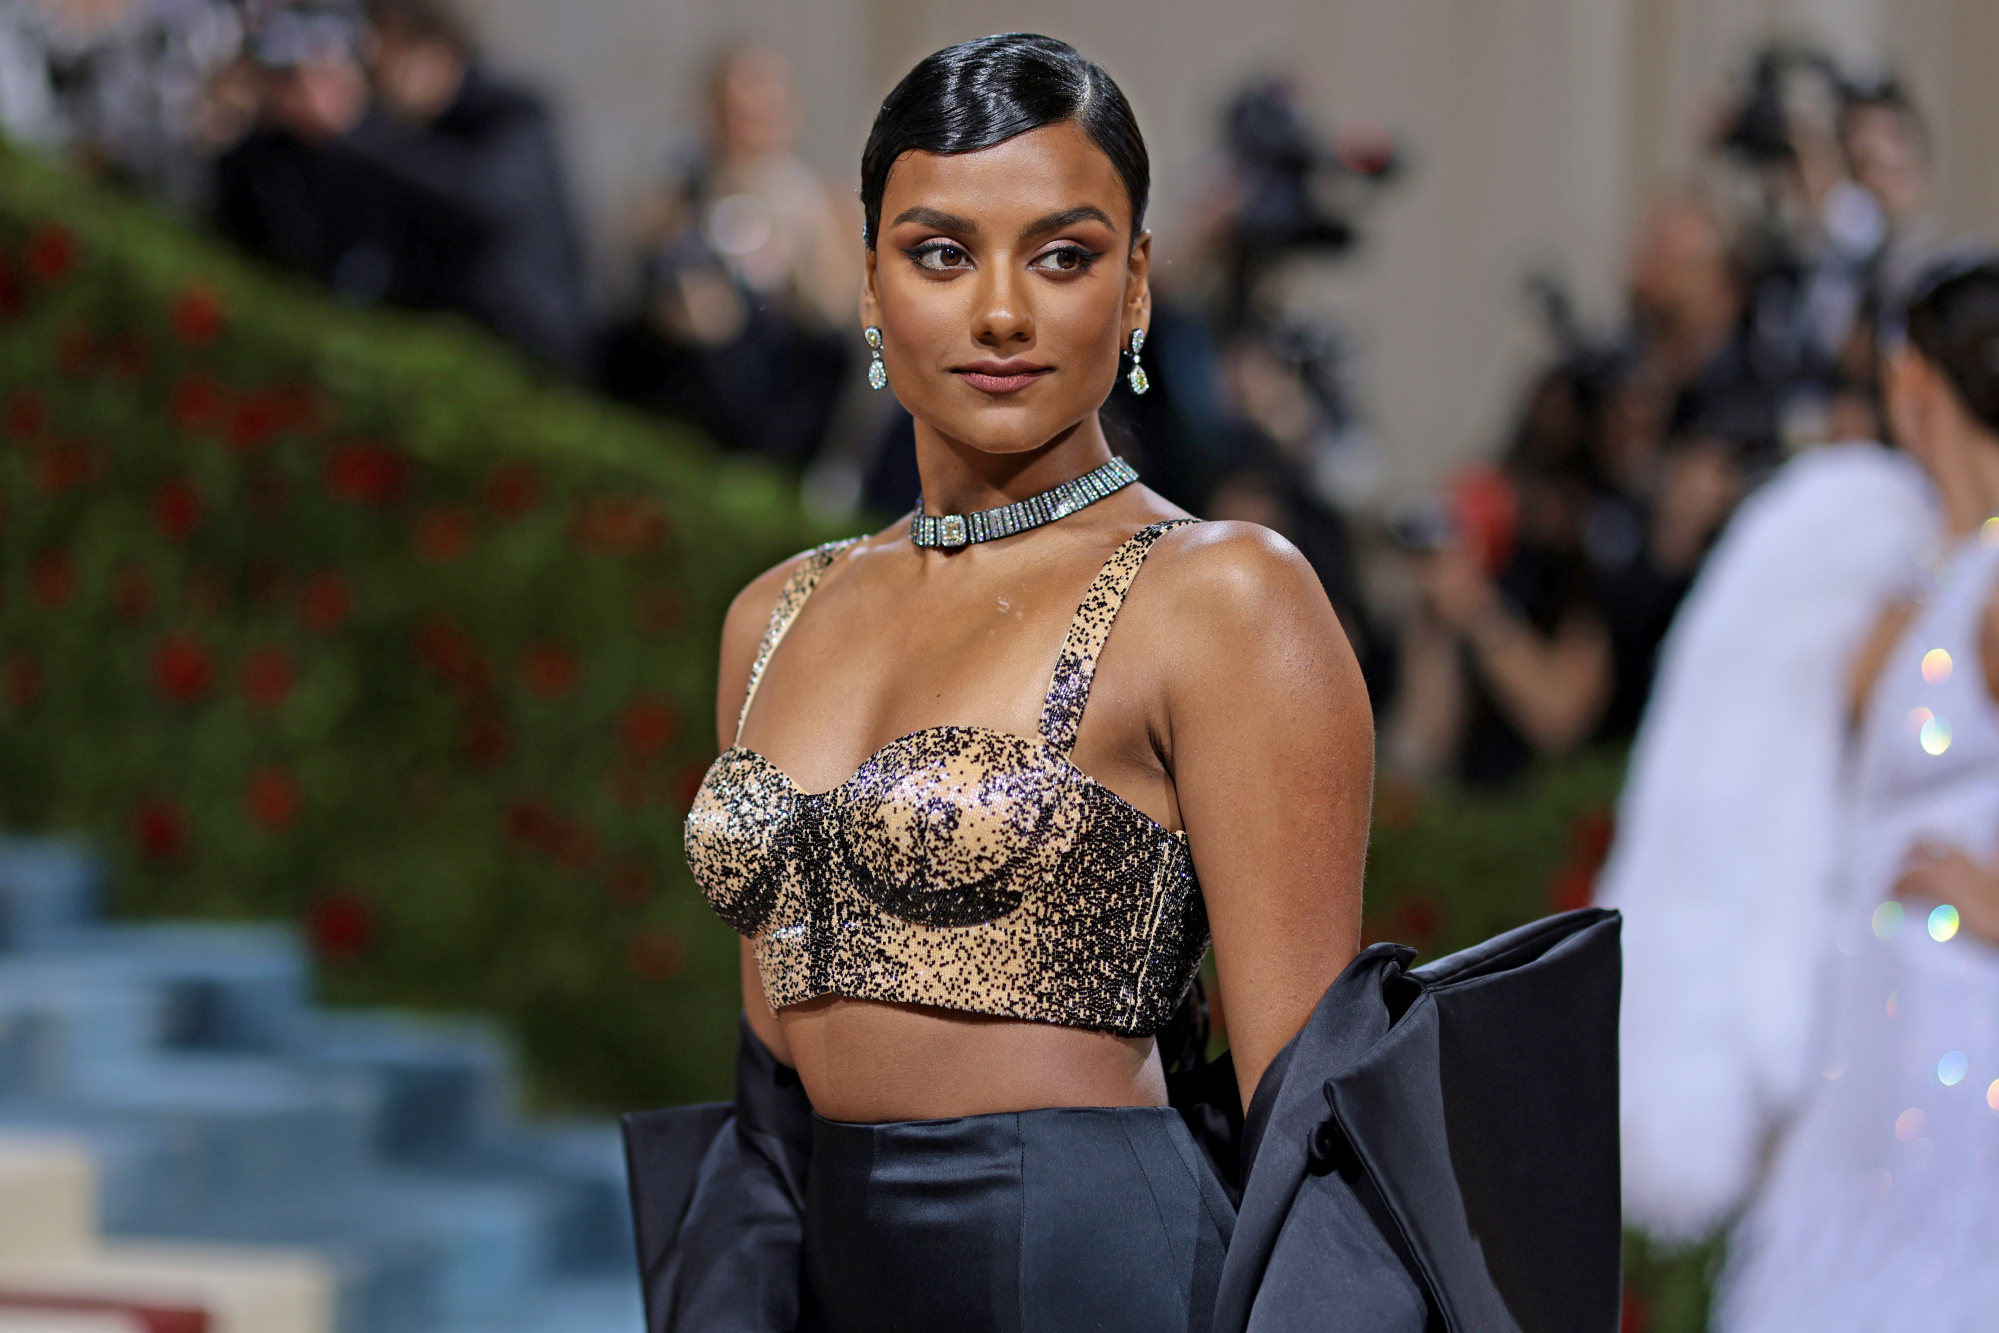 Famous for her role in Netflix’s Bridgerton, Simone Ashley stunned during her Met Gala debut in jewellery pieces from De Beers’ High Jewellery collection. Photo: Getty Images